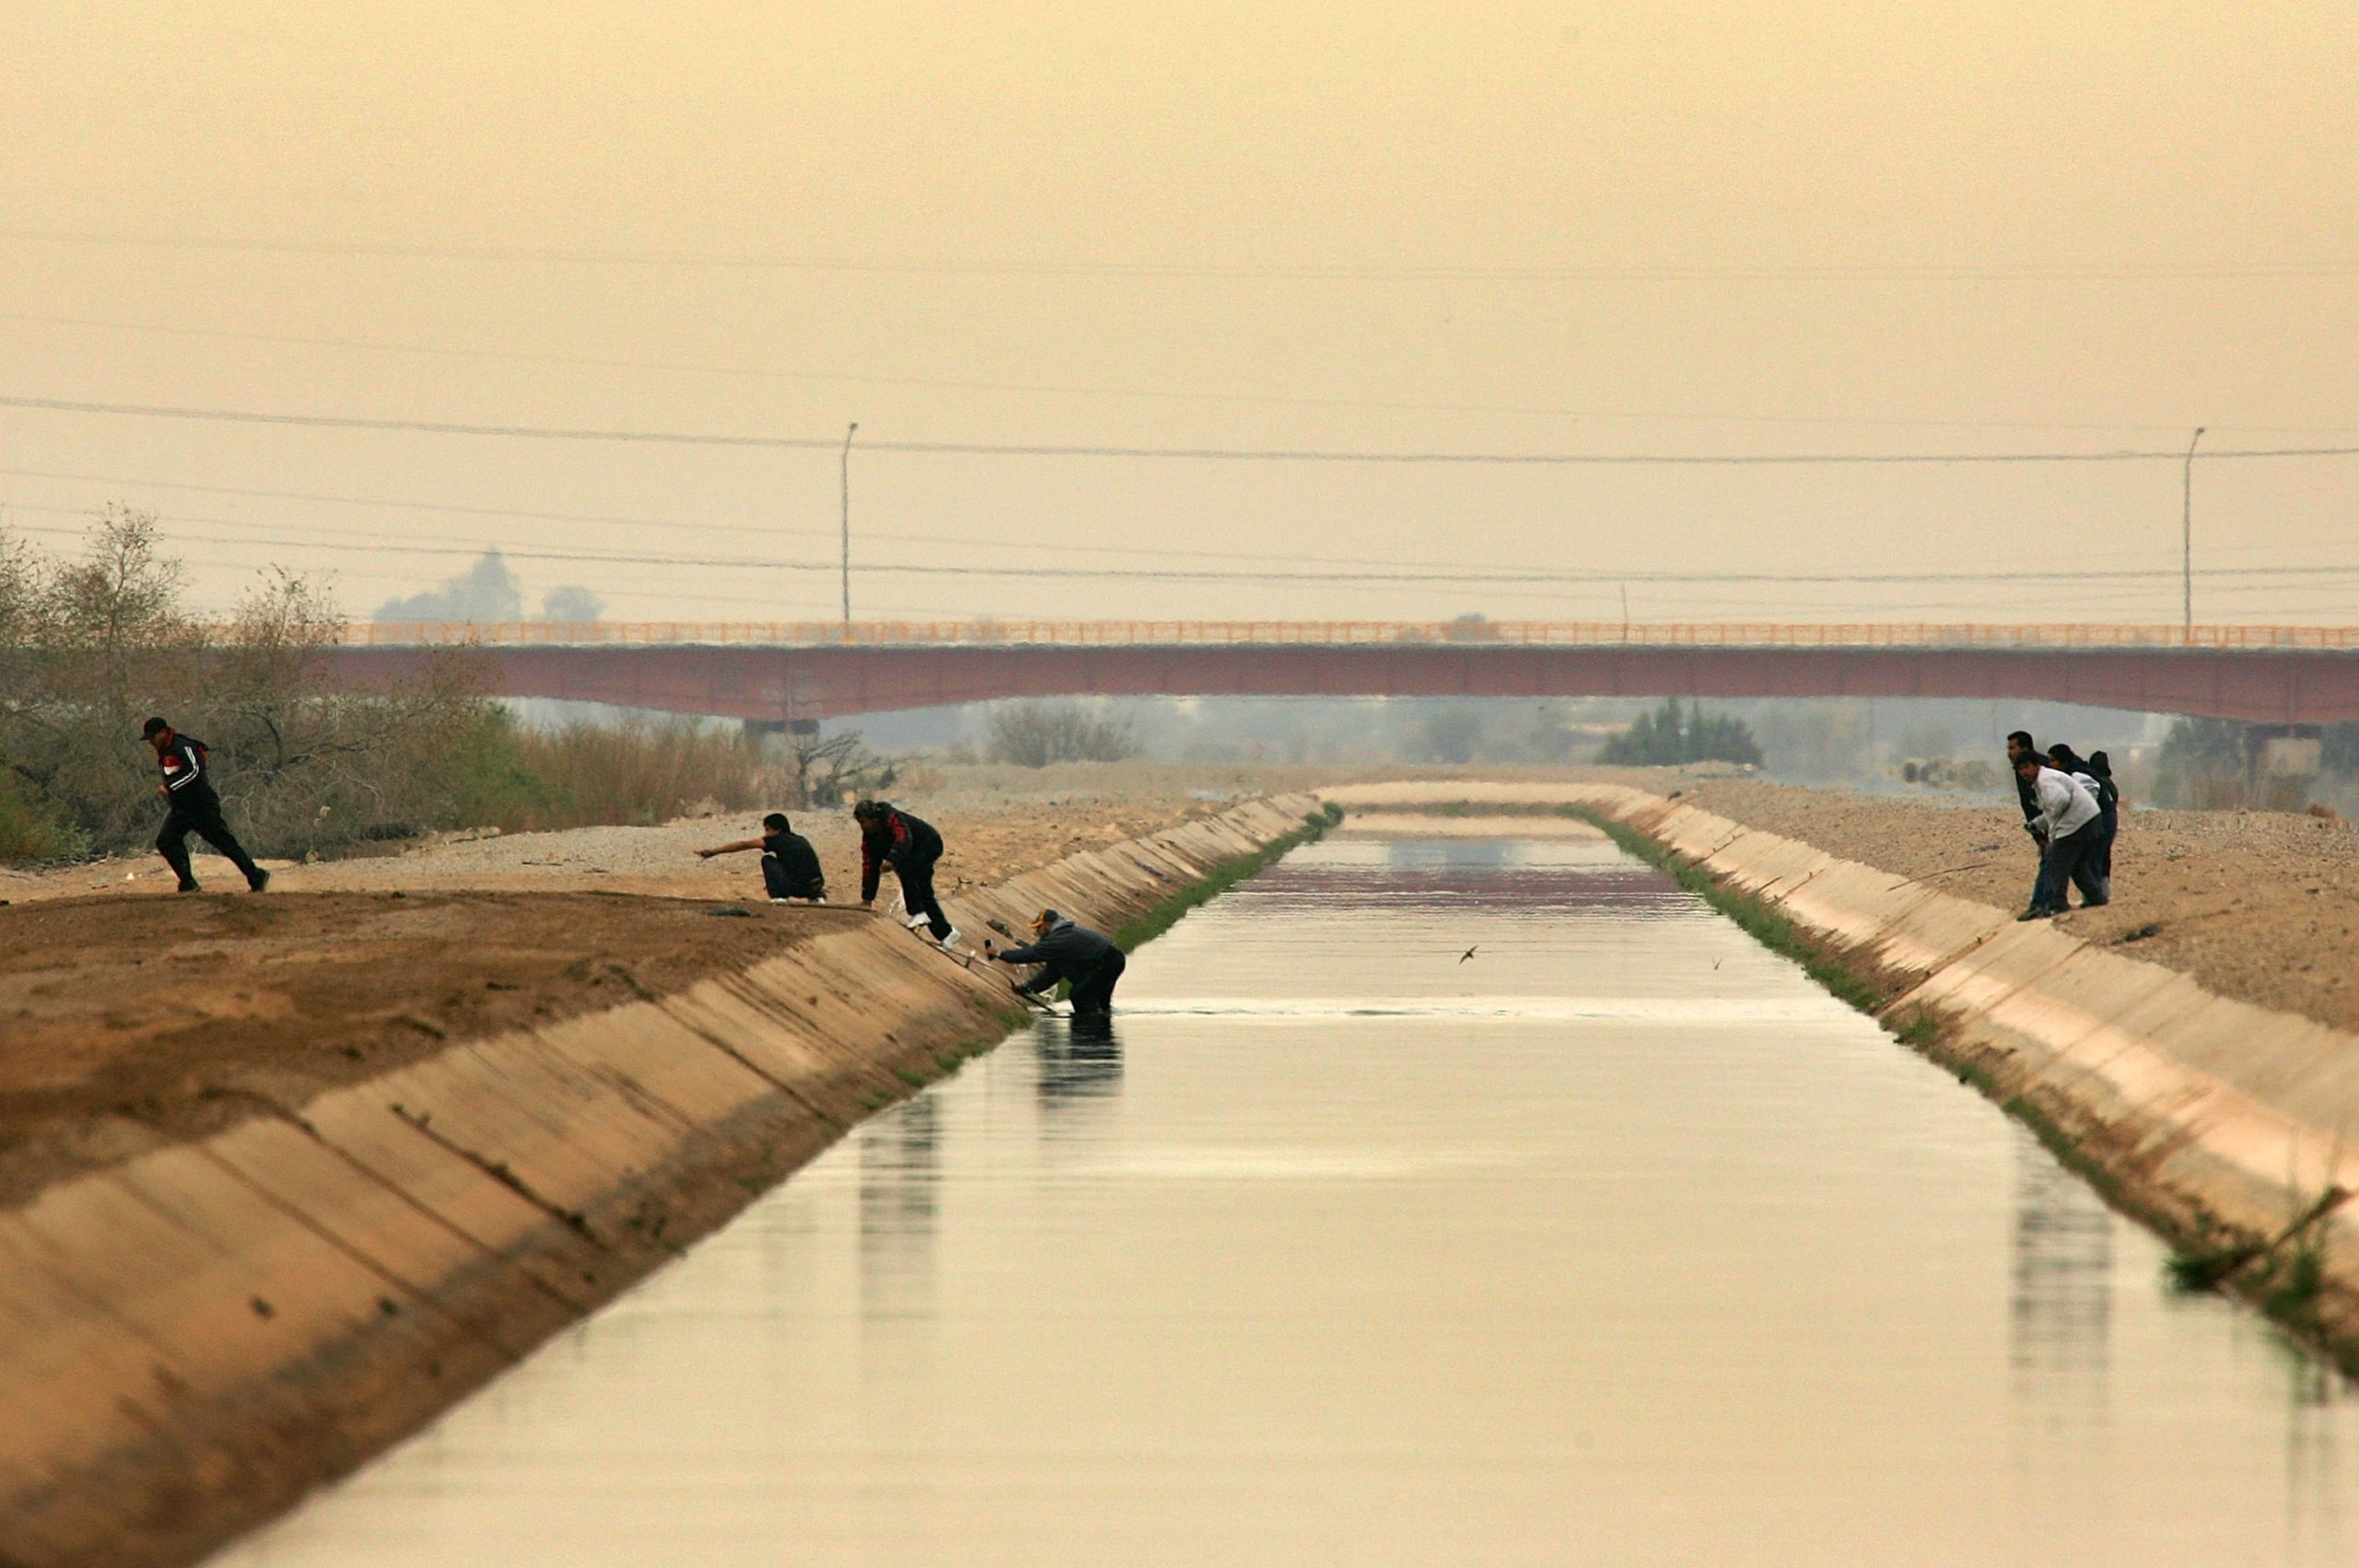  People cross a canal after walking over the dry Colorado River to cross illegally into the U.S. from Mexico on March 16, 2006 the border town of near San Luis, south of Yuma, Arizona. (Photo by David McNew/Getty Images)